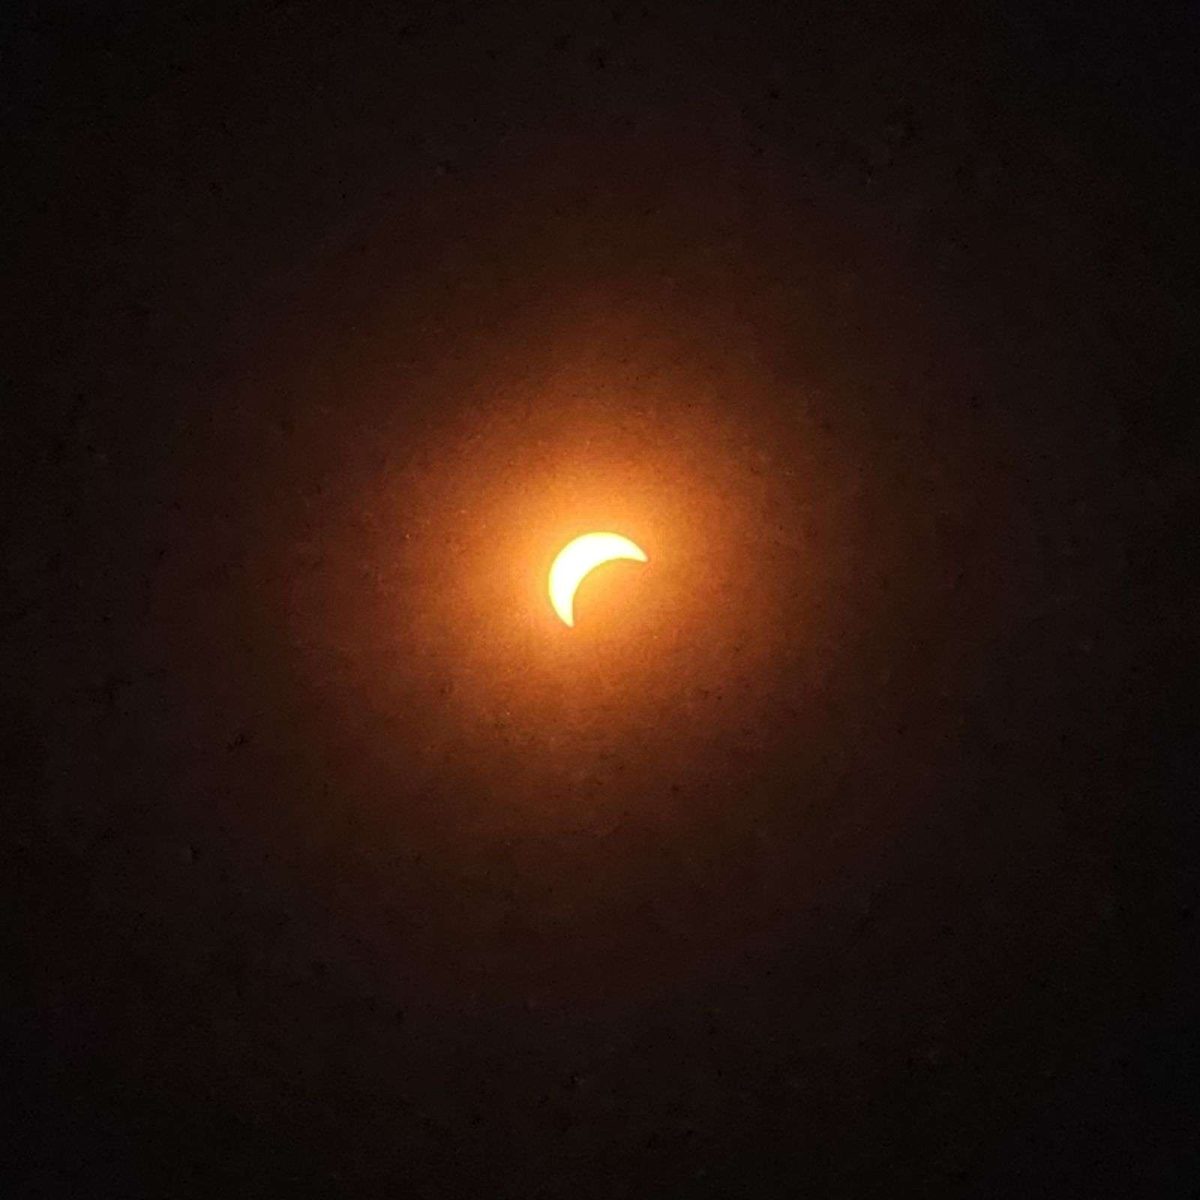 The Solar Eclipse at 